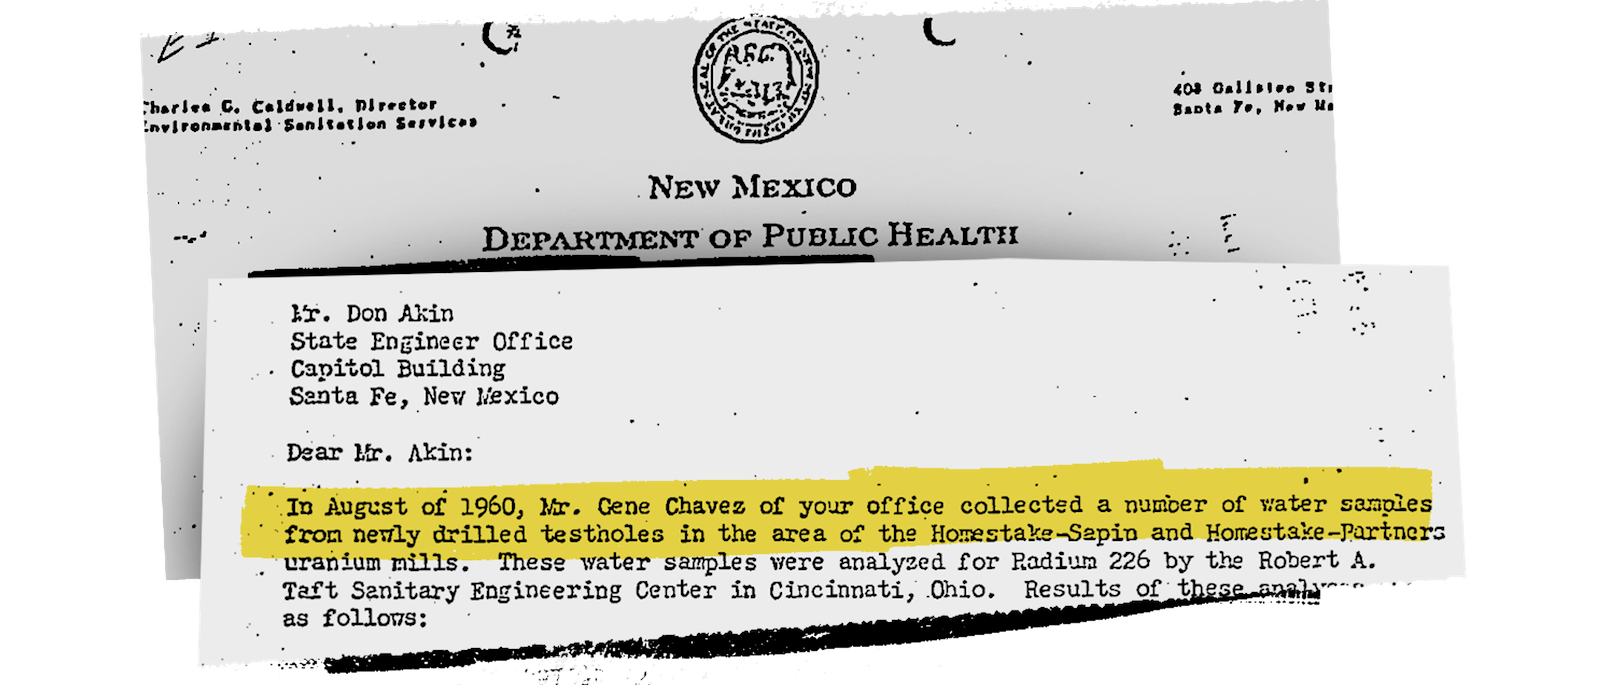 A notice from the New Mexico Department of Health about testing water around the Homestake mine.